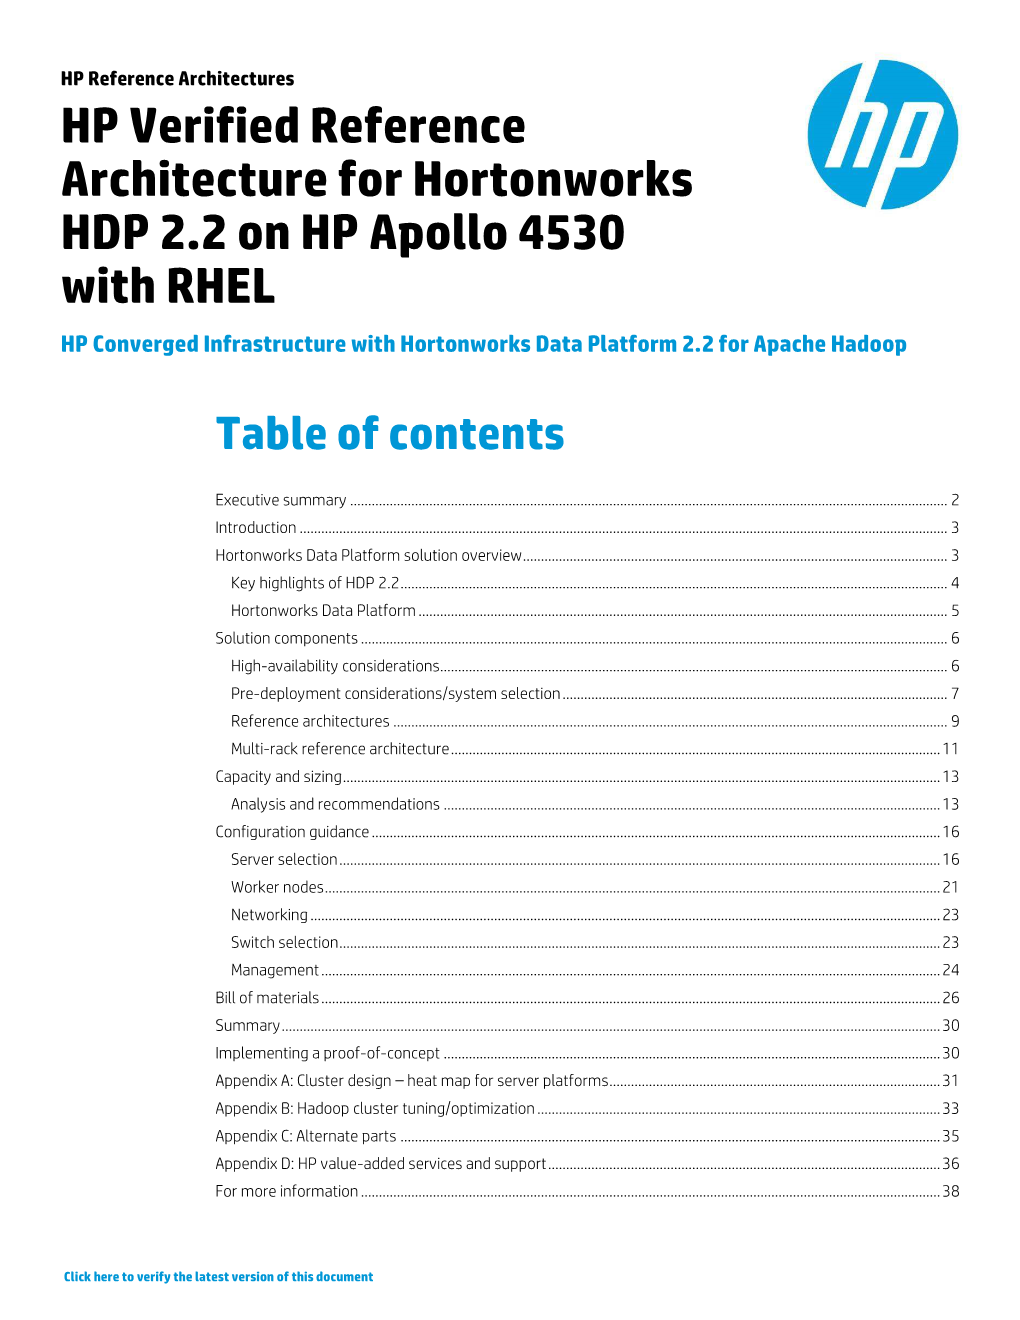 HP Verified Reference Architecture for Hortonworks HDP 2.2